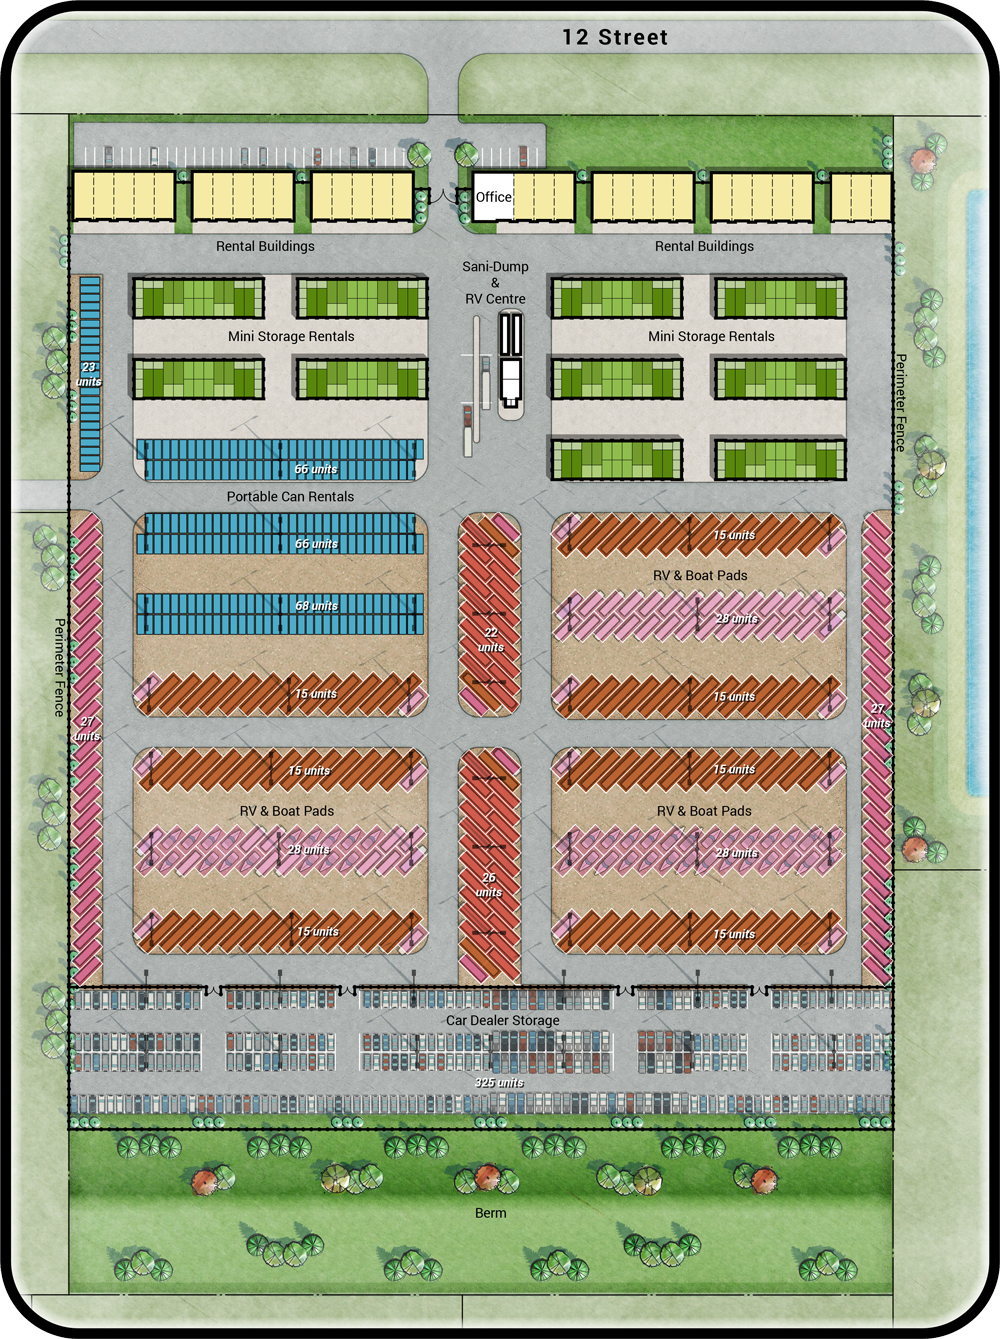 Store Right Facility Map